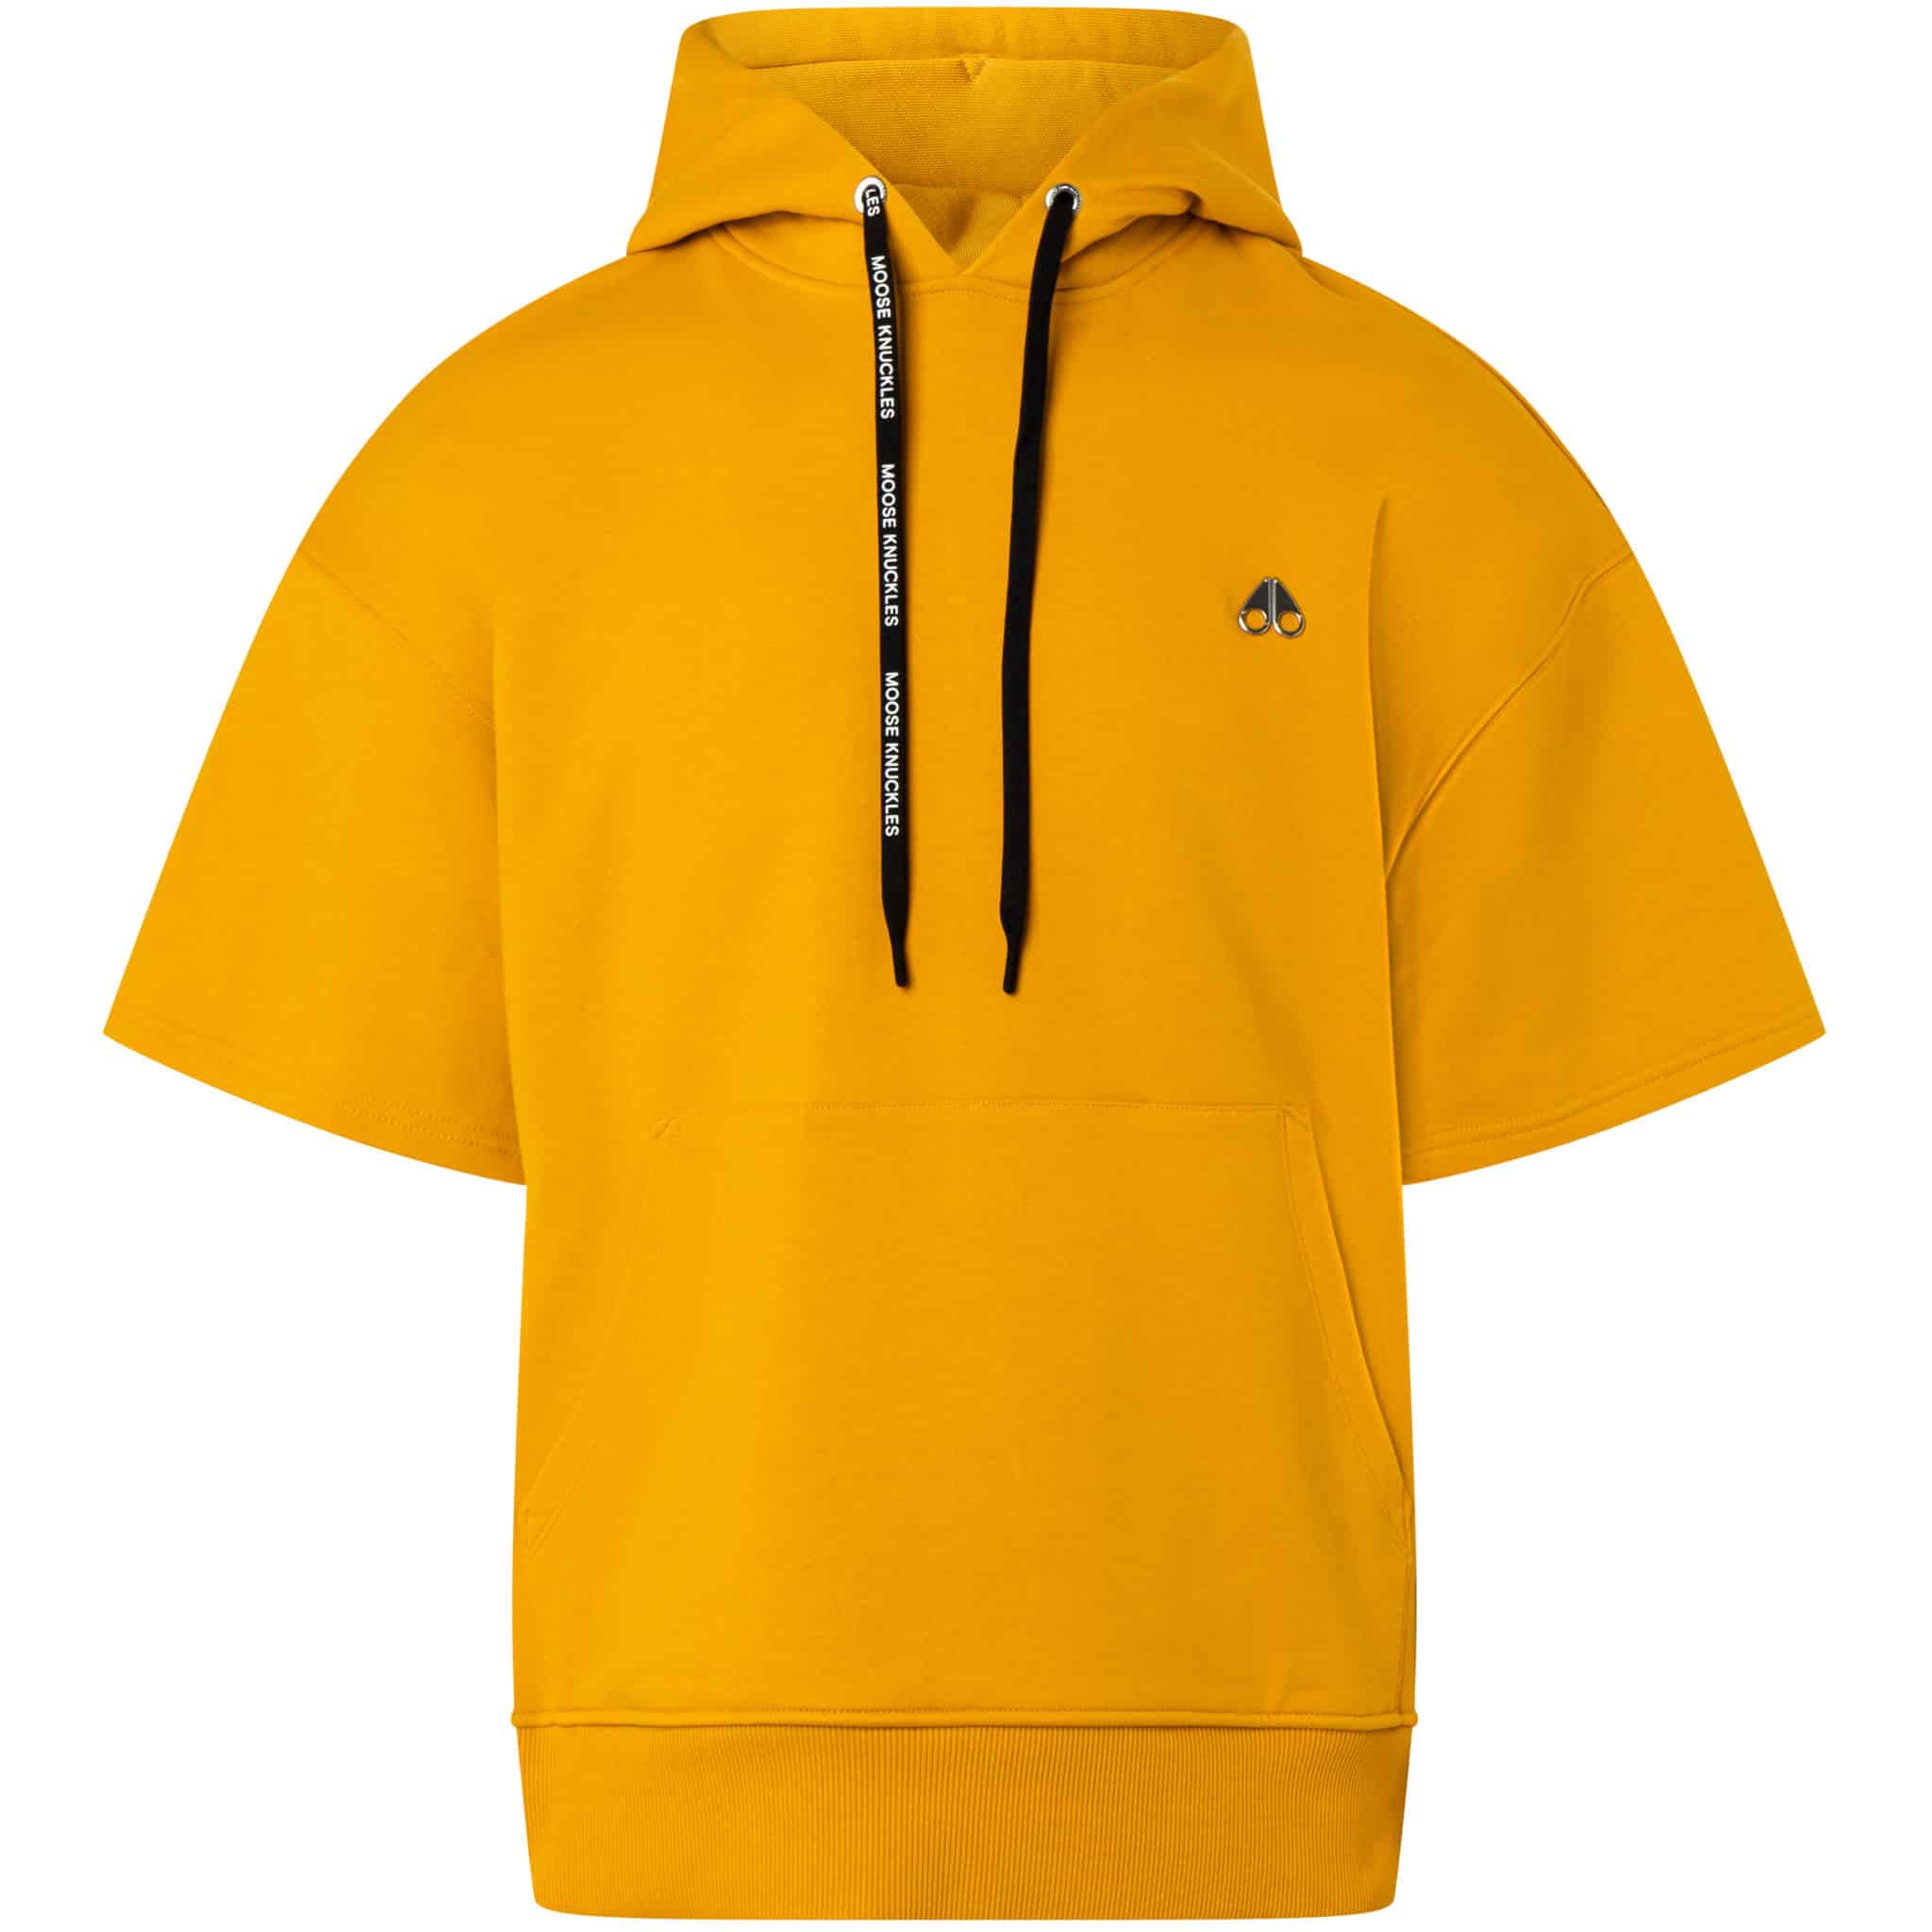 INSERT Moose Knuckles Spring Summer 2022 New Collection SIESTA KEY Hoodie Golden Yellow